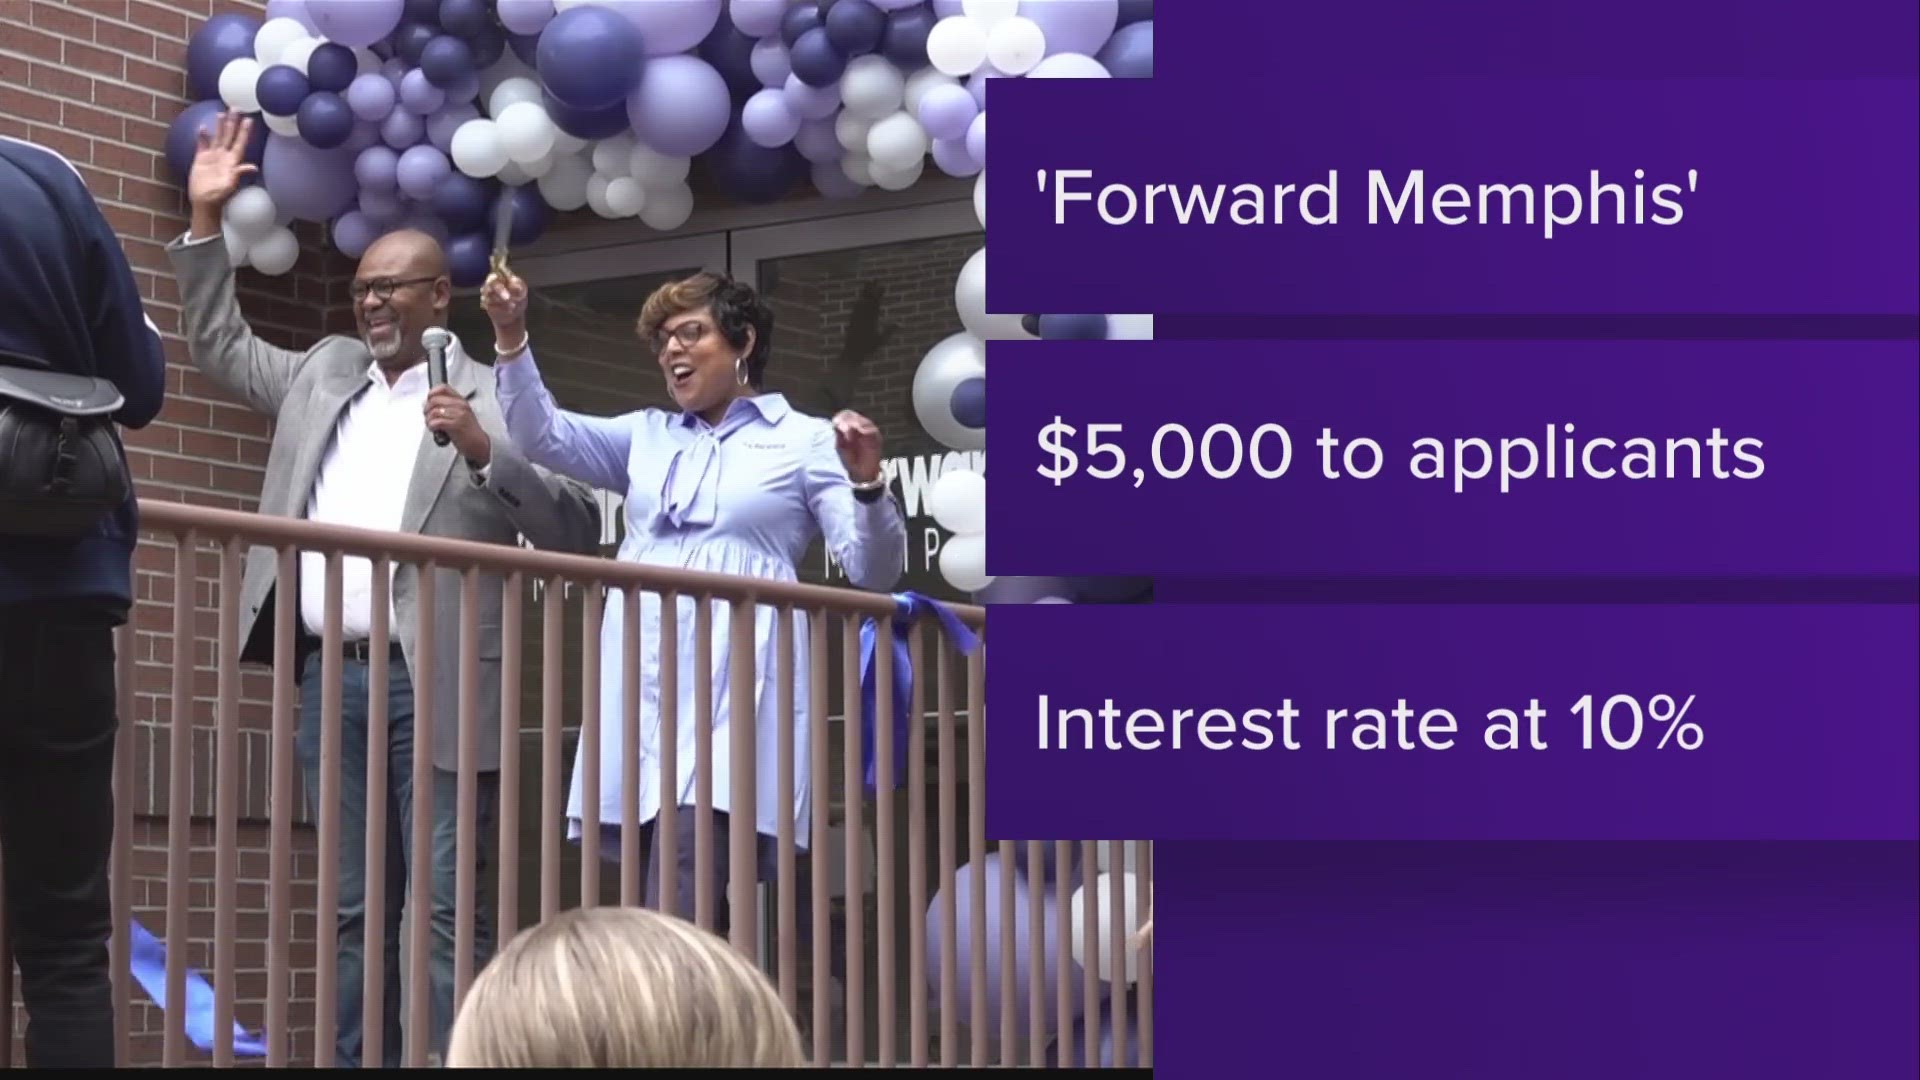 'Forward Memphis' announced a partnership with banks and non-profits to provide up to $5,000 to qualified applicants.